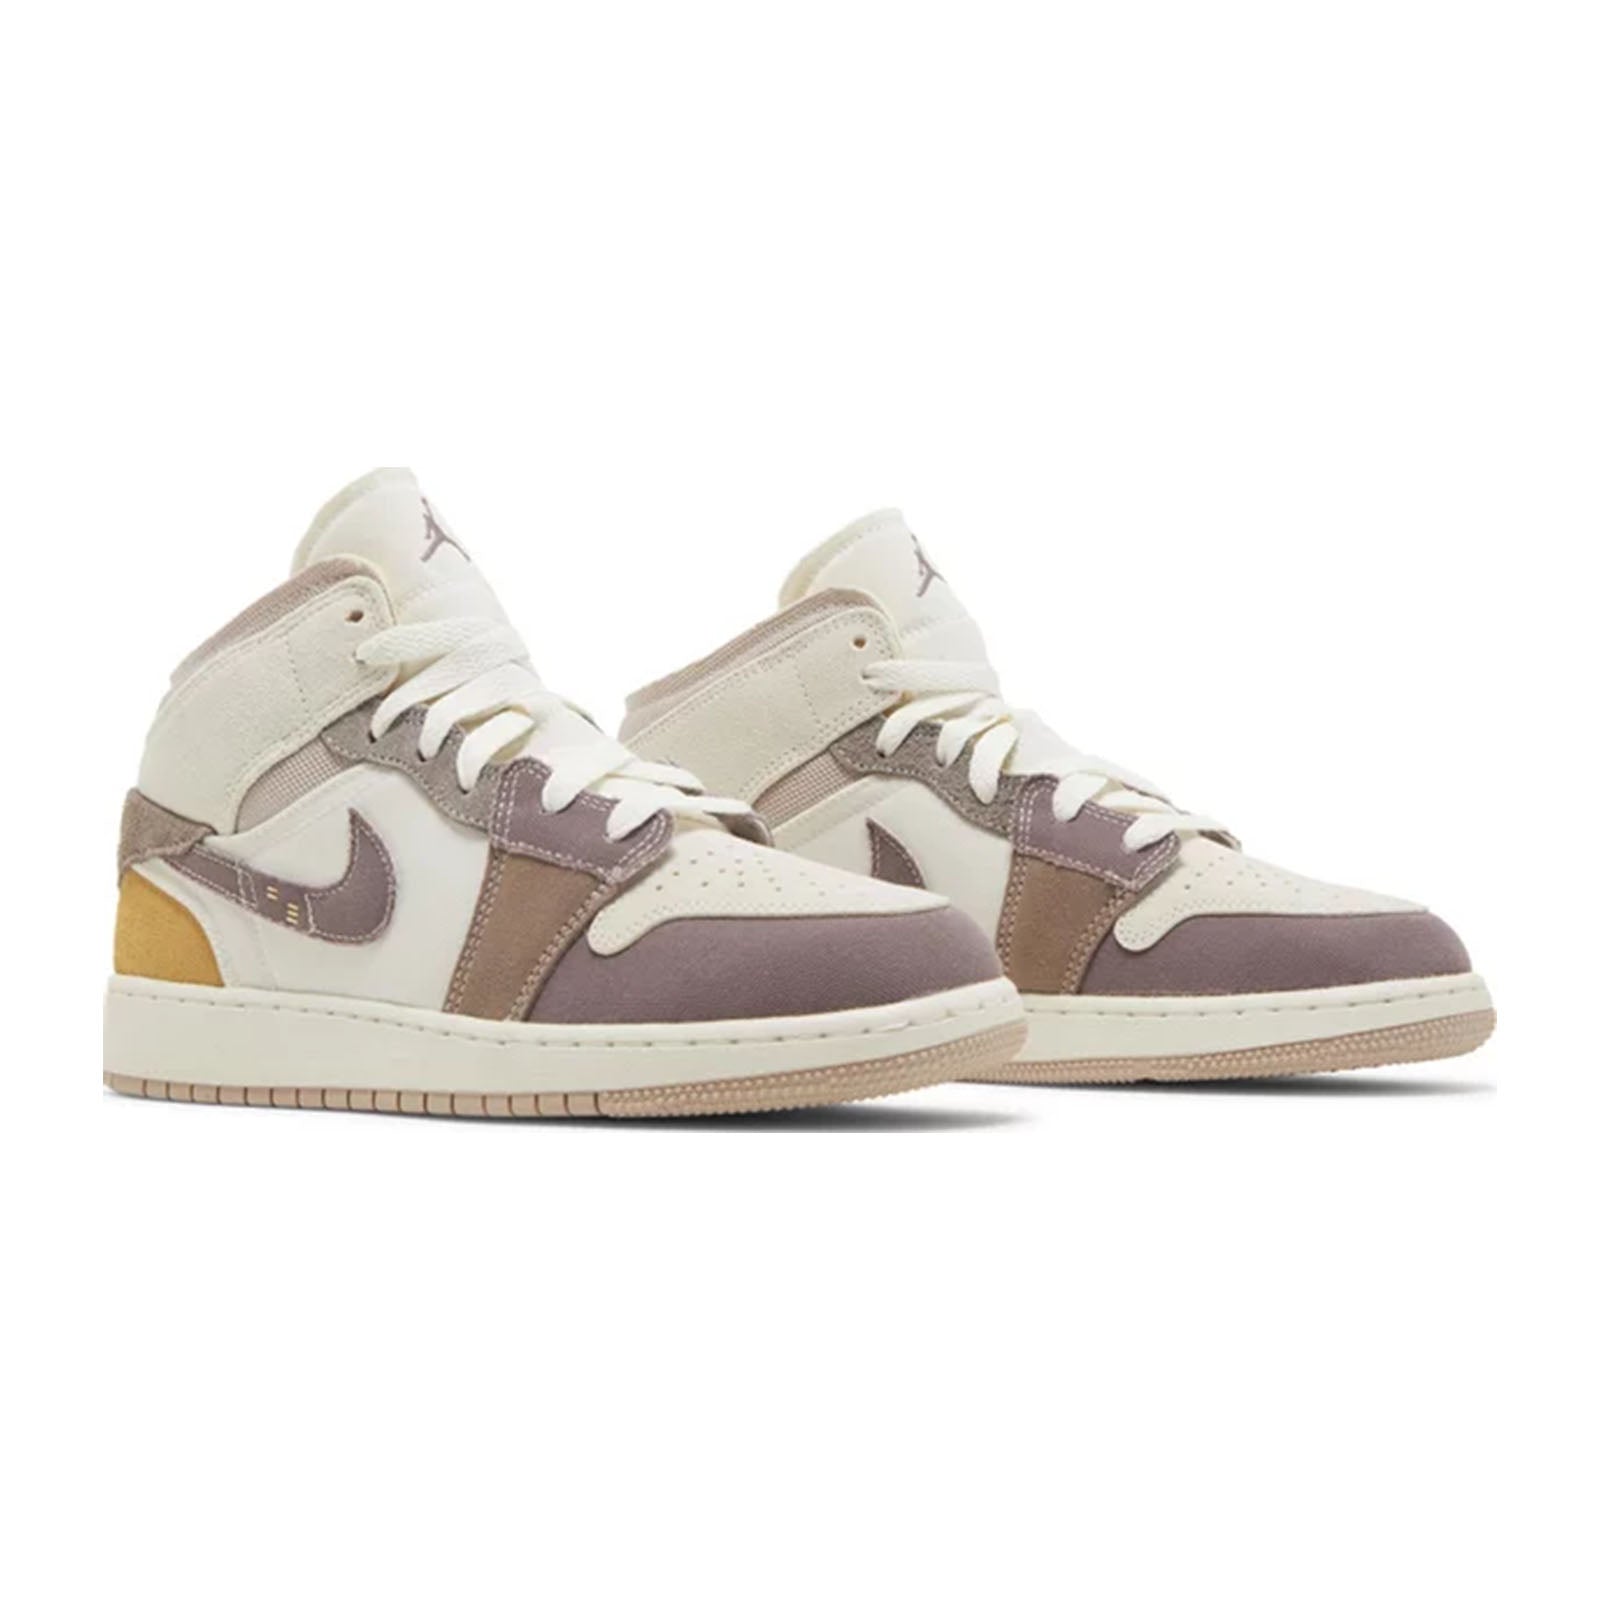 Air Year jordan 1 Mid (GS), SE Craft Inside Out Taupe Haze